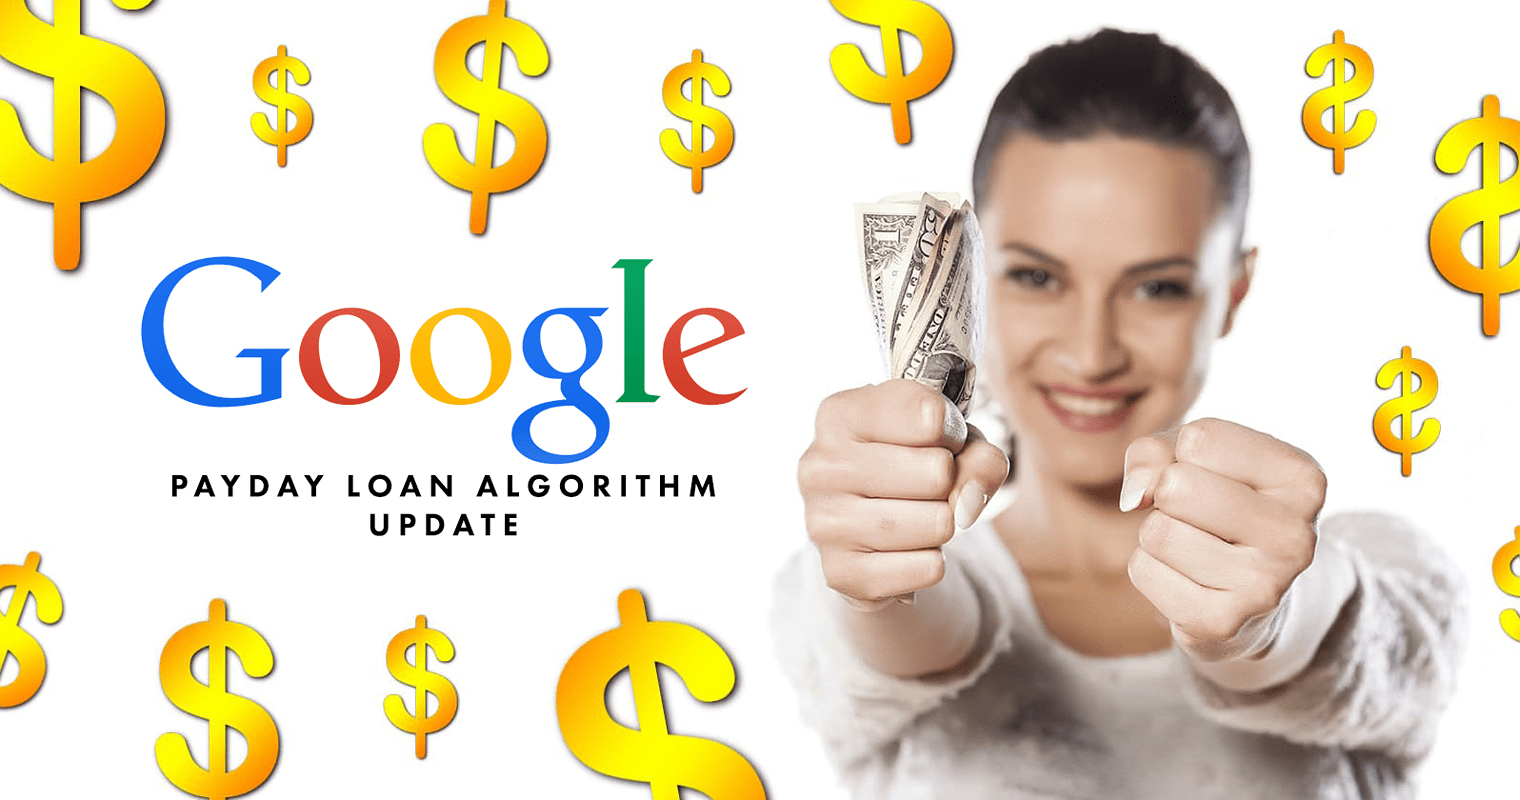 What You Need to Know About the Google Payday Loan Algorithm Update